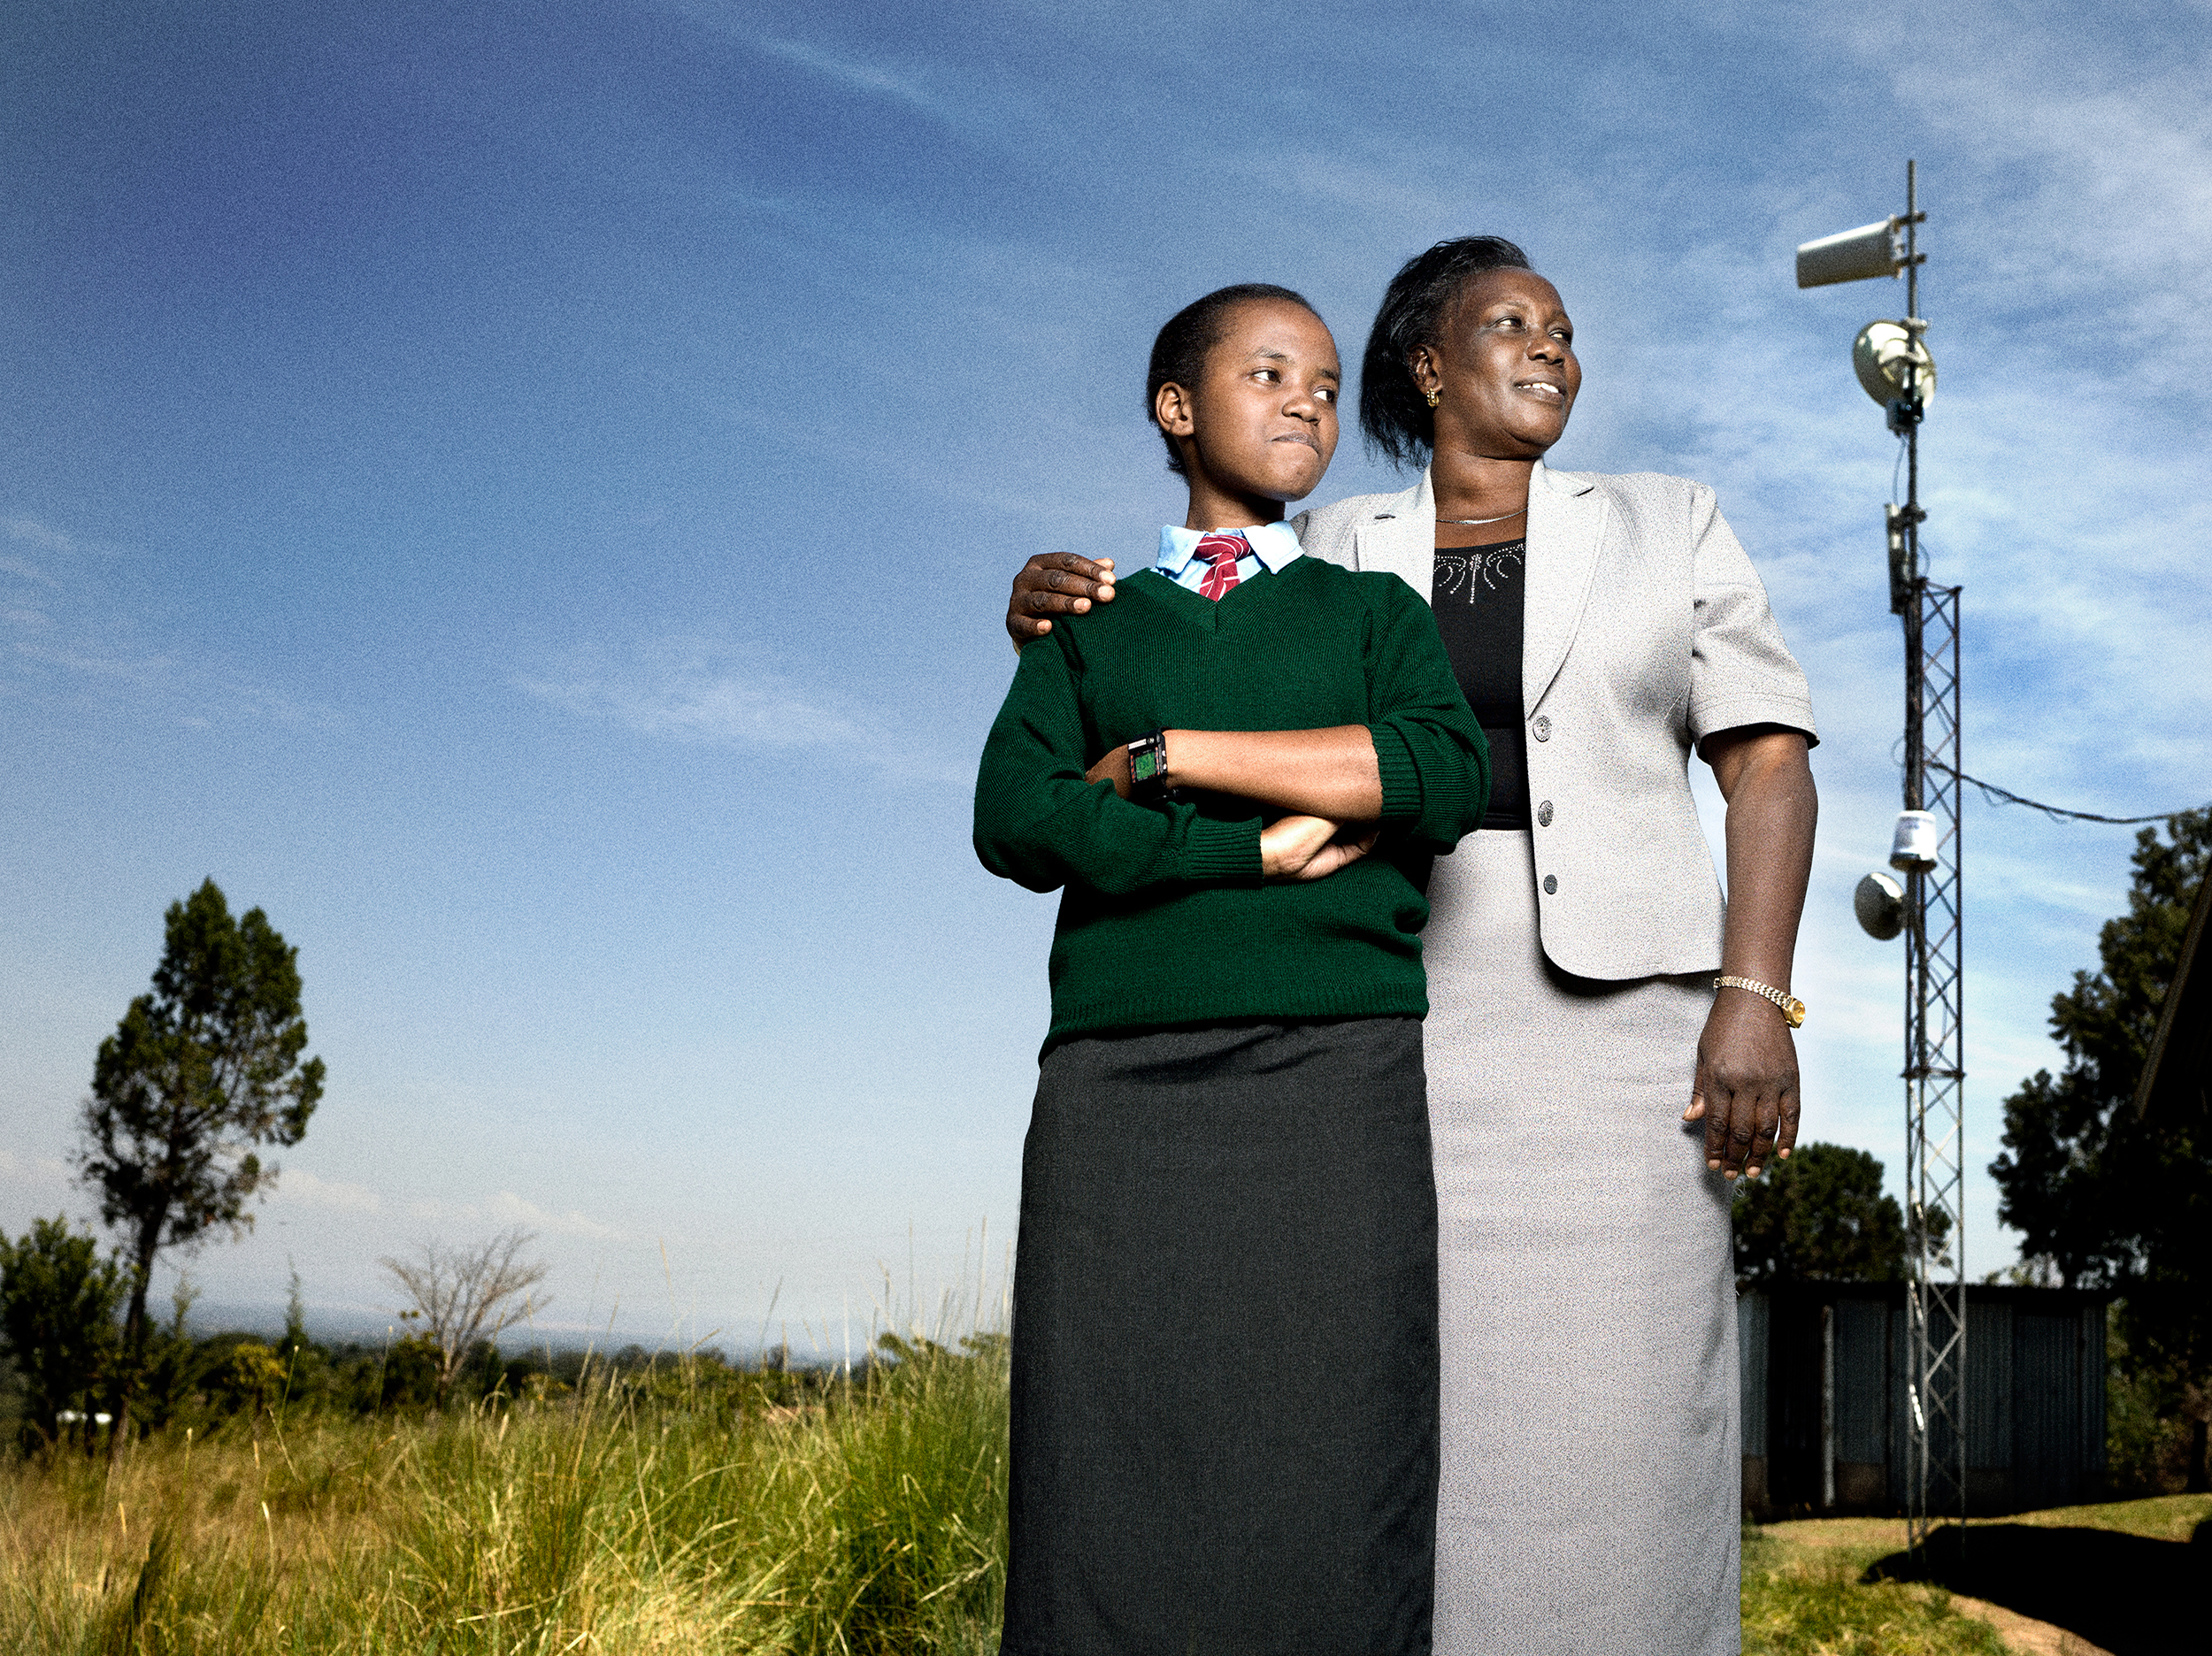 School principal Beatrice Ndorongo: With online access comes education, opportunity